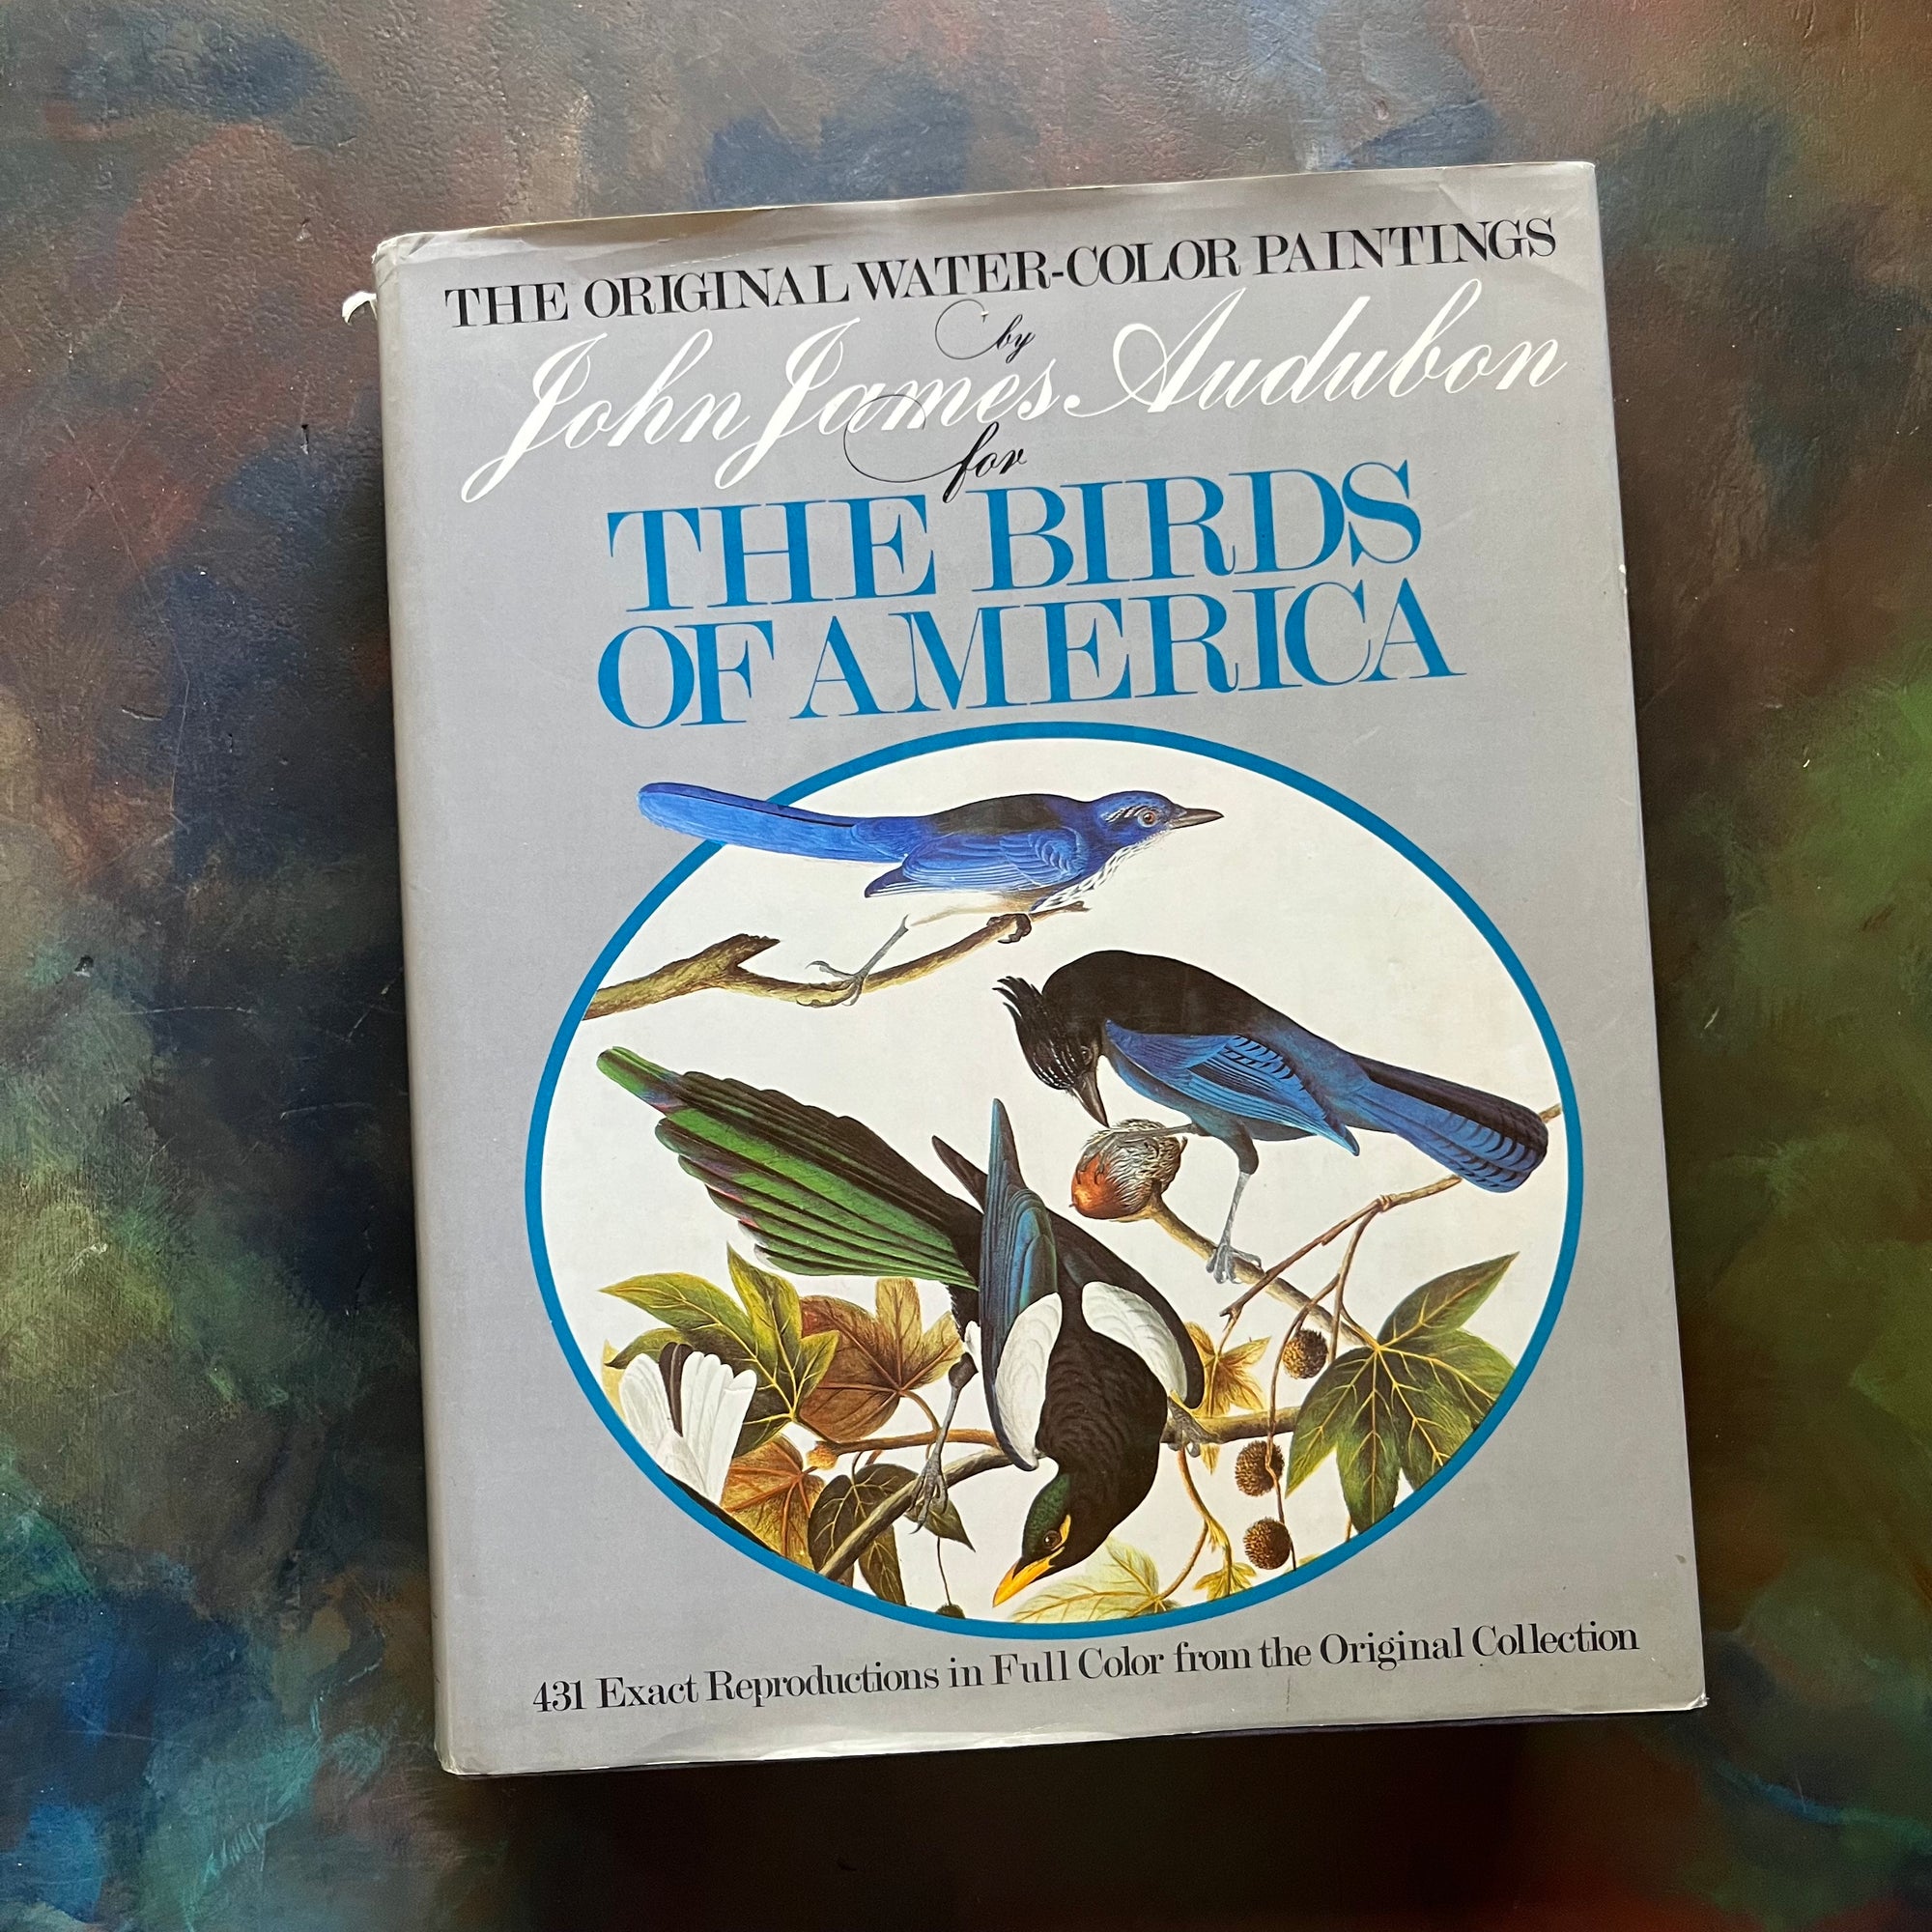 The Original Water-Color Paintings of John James Audubon for The Birds of America-vintage John J. Audubon bird prints-view of the dust jacket's front cover